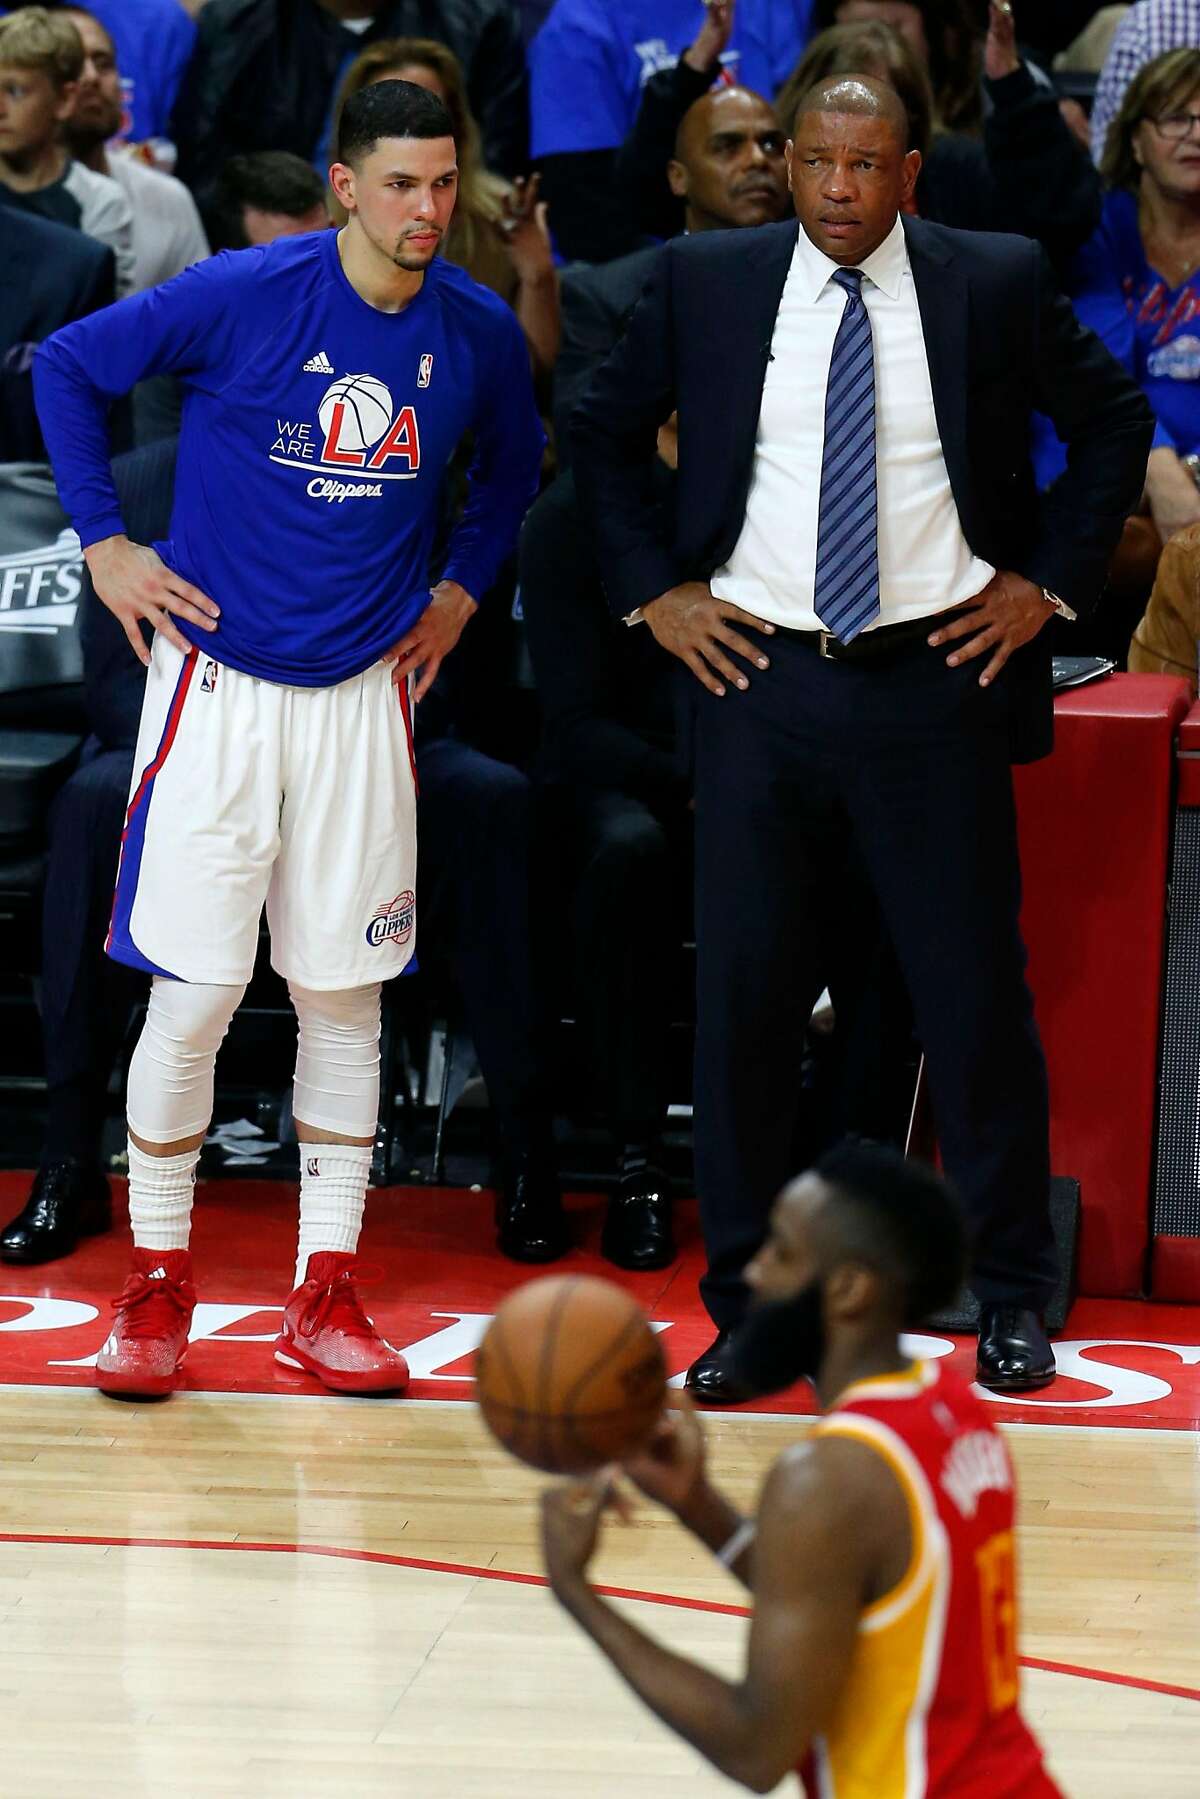 Los Angeles Clippers guard Austin Rivers (25) stands with his father, Clippers head coach Doc Rivers, as Houston Rockets guard James Harden (13) shoots a free throw during the second half of Game 3 of the NBA Western Conference semifinals at Staples Center on Friday, May 8, 2015, in Los Angeles. ( Karen Warren / Houston Chronicle )